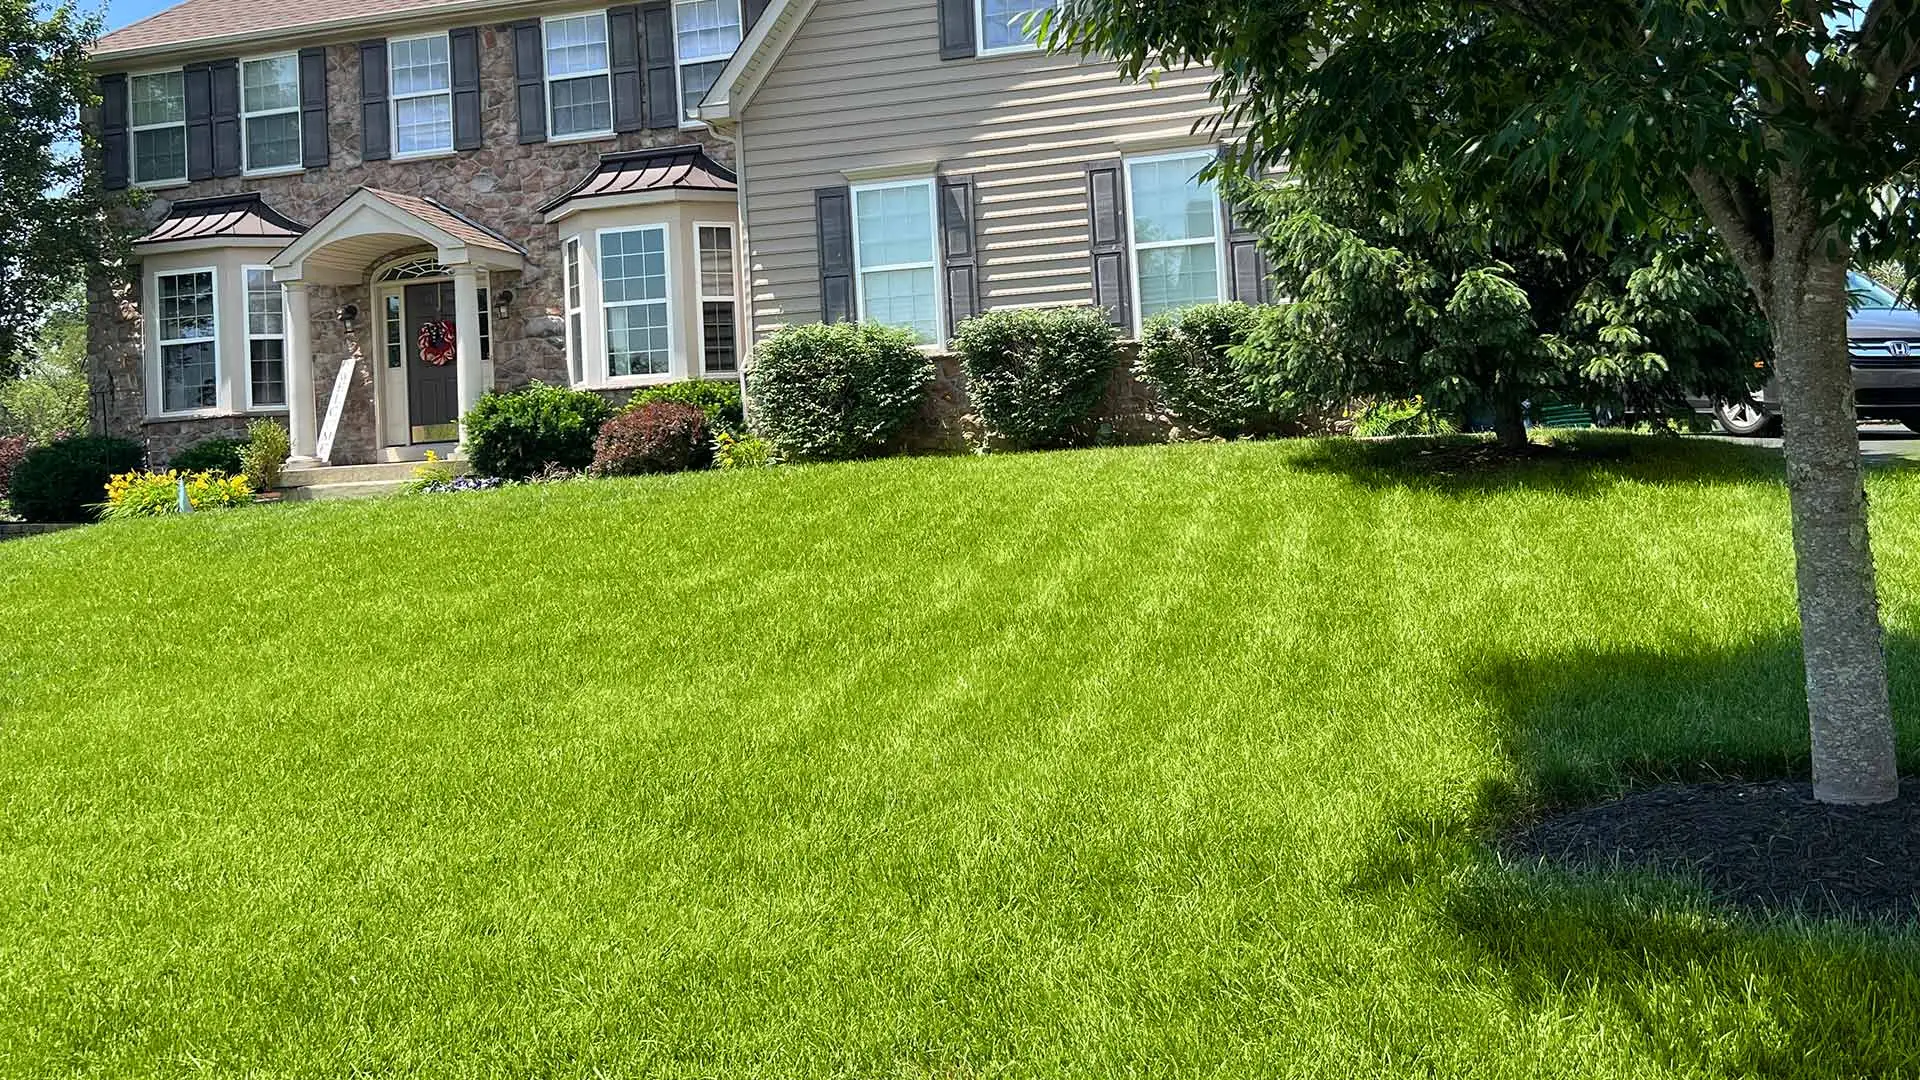 Healthy home lawn with landscaping outside Telford and Souderton, PA.